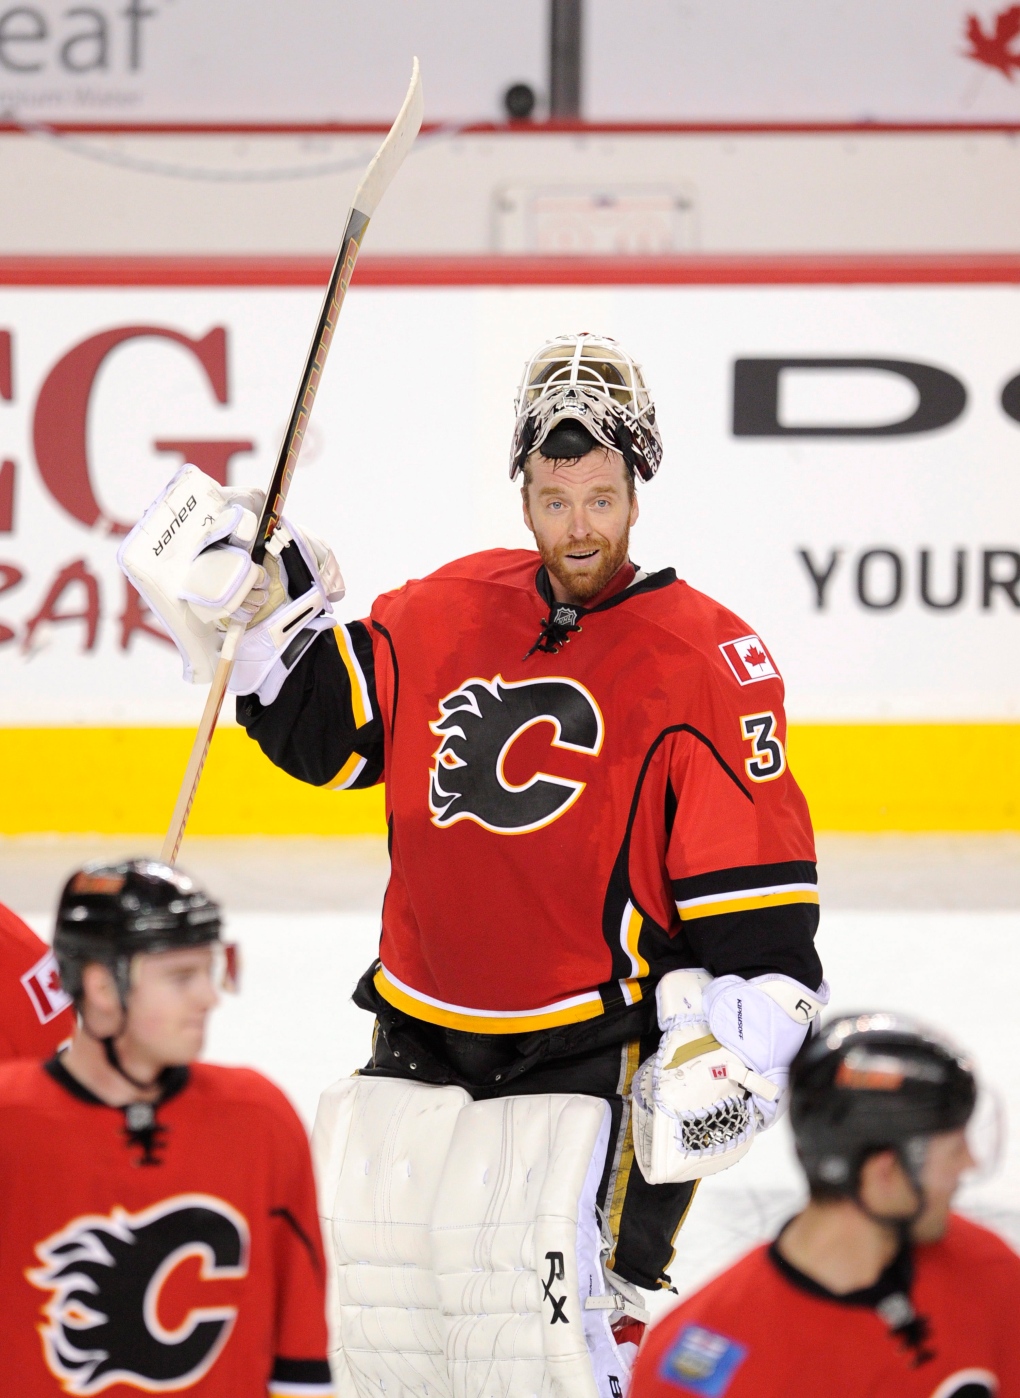 Miikka Kiprusoff announces retirement from NHL - The Globe and Mail